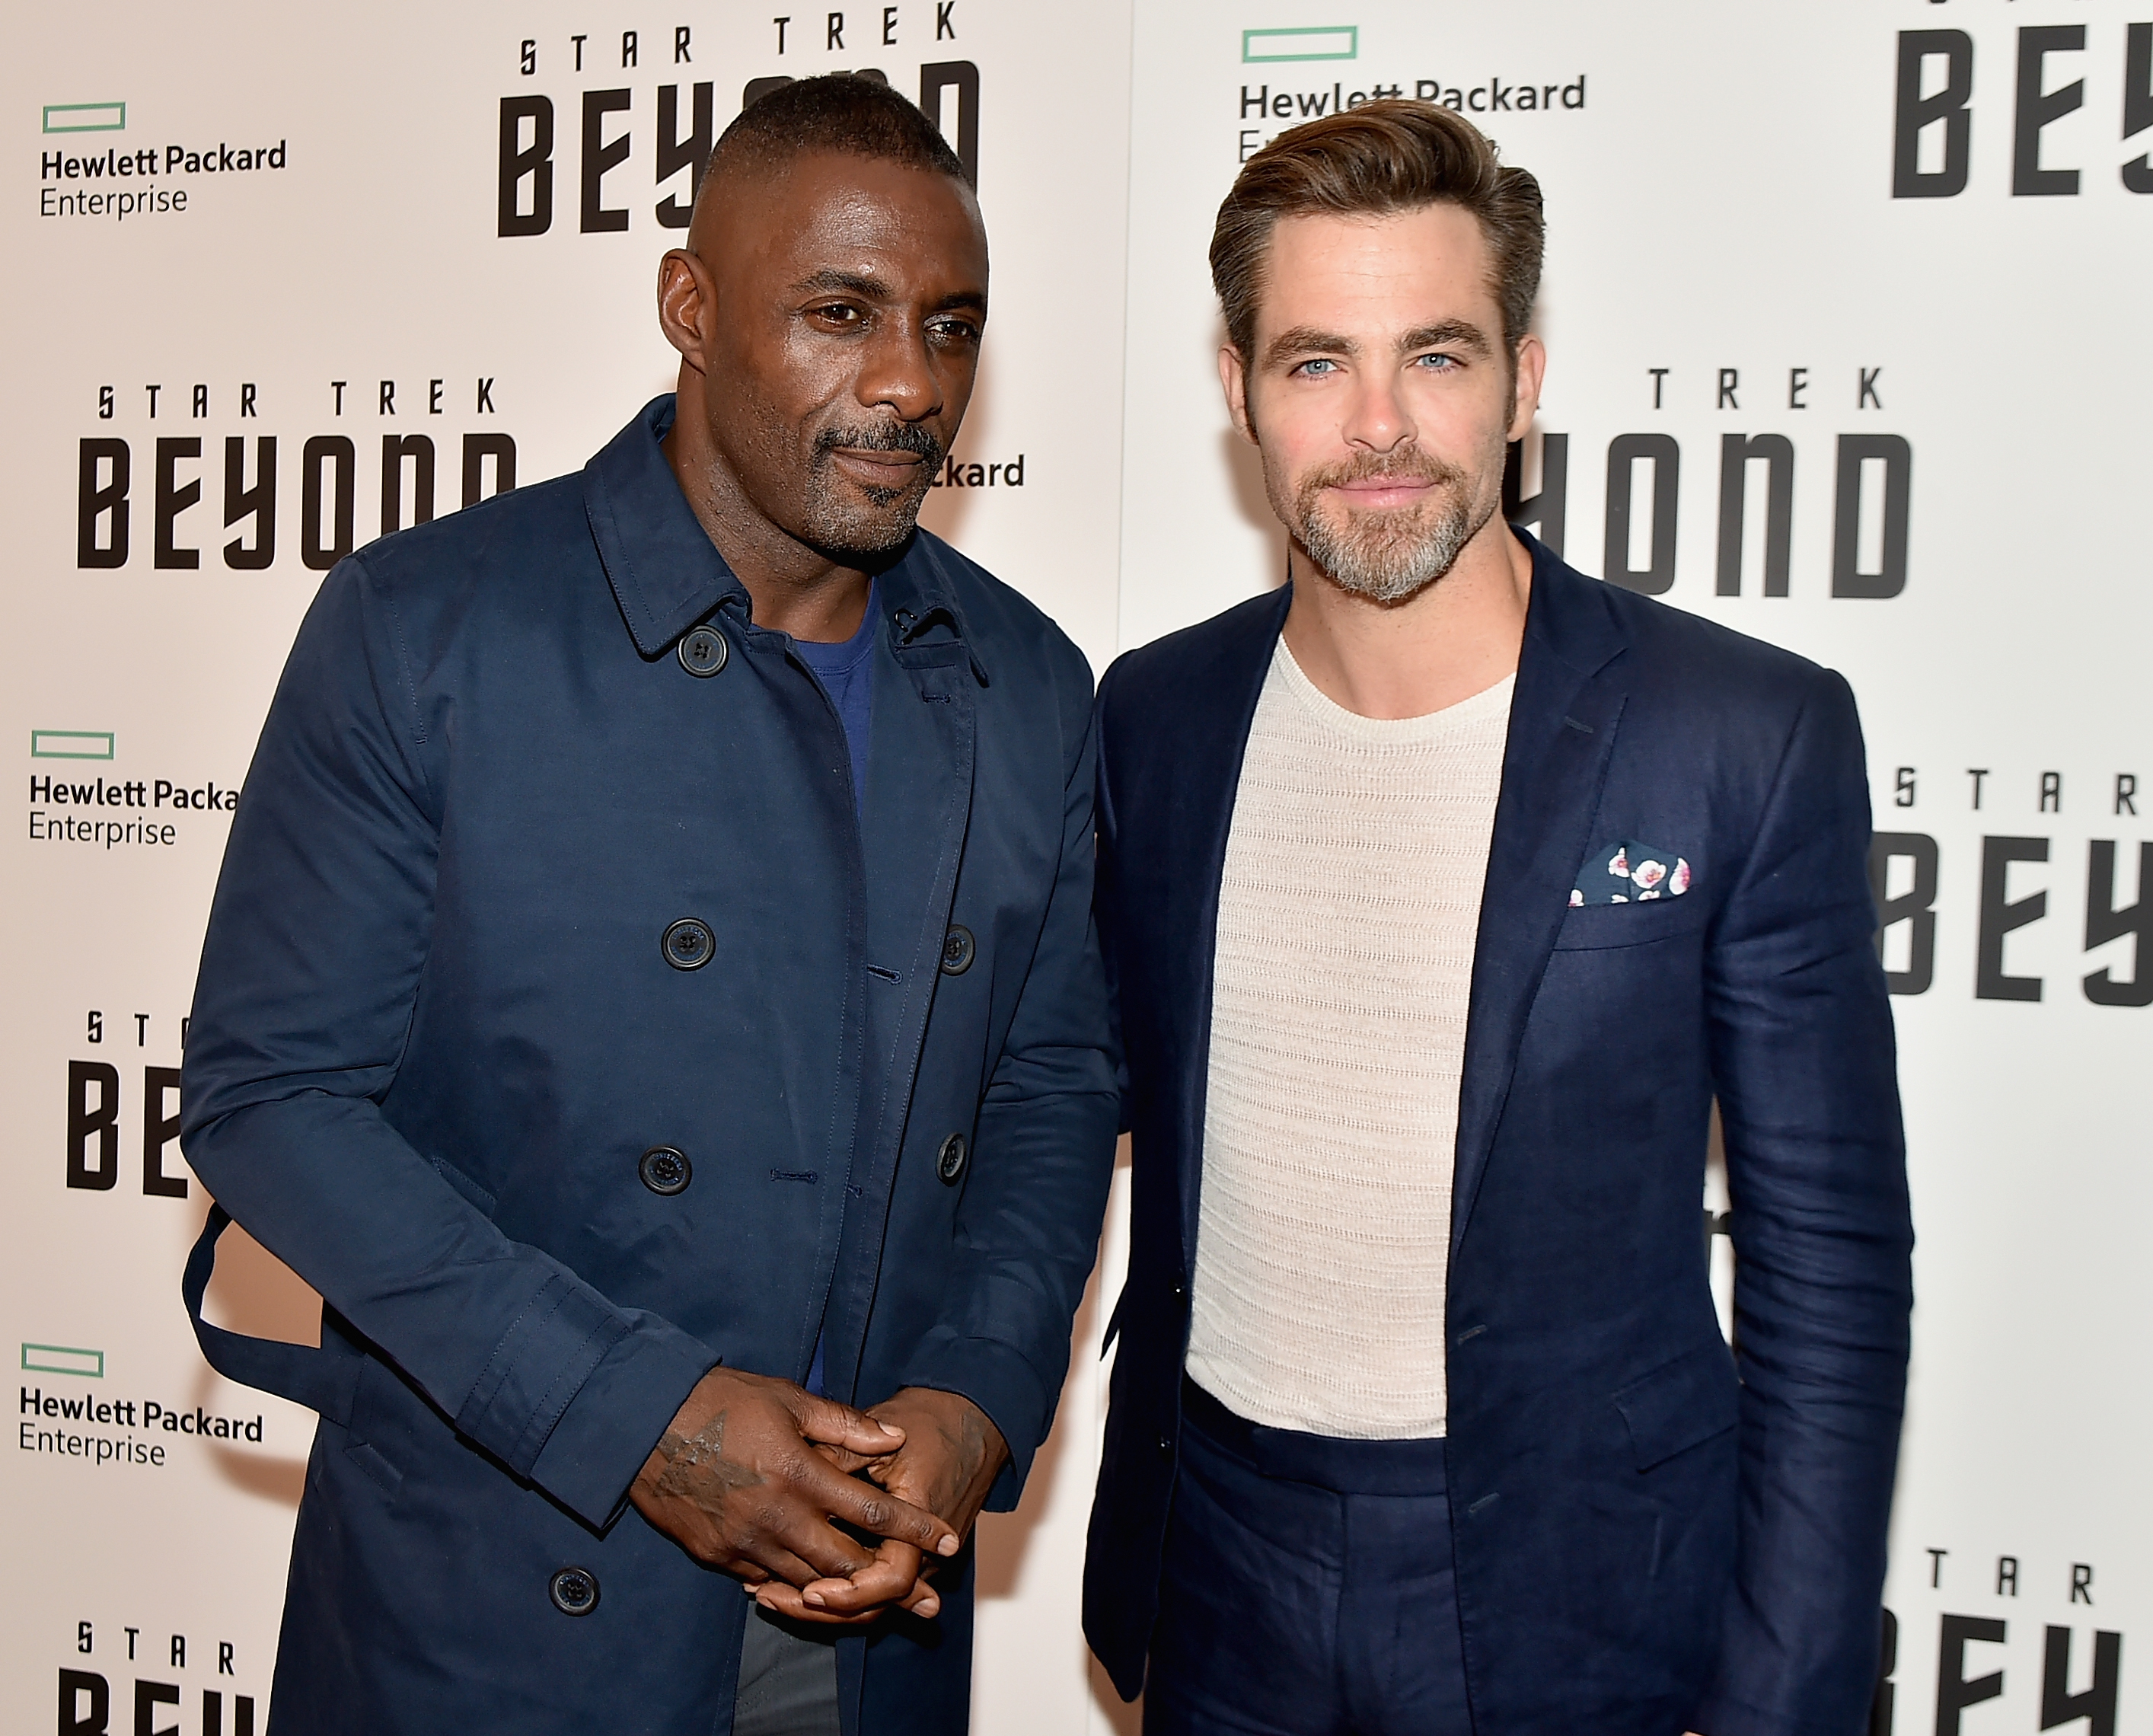 NEW YORK, NY - JULY 18:  Idris Elba and Chris Pine attend the "Star Trek Beyond" New York Premiere at Crosby Street Hotel on July 18, 2016 in New York City.  (Photo by Theo Wargo/Getty Images) (Theo Wargo—Getty Images)